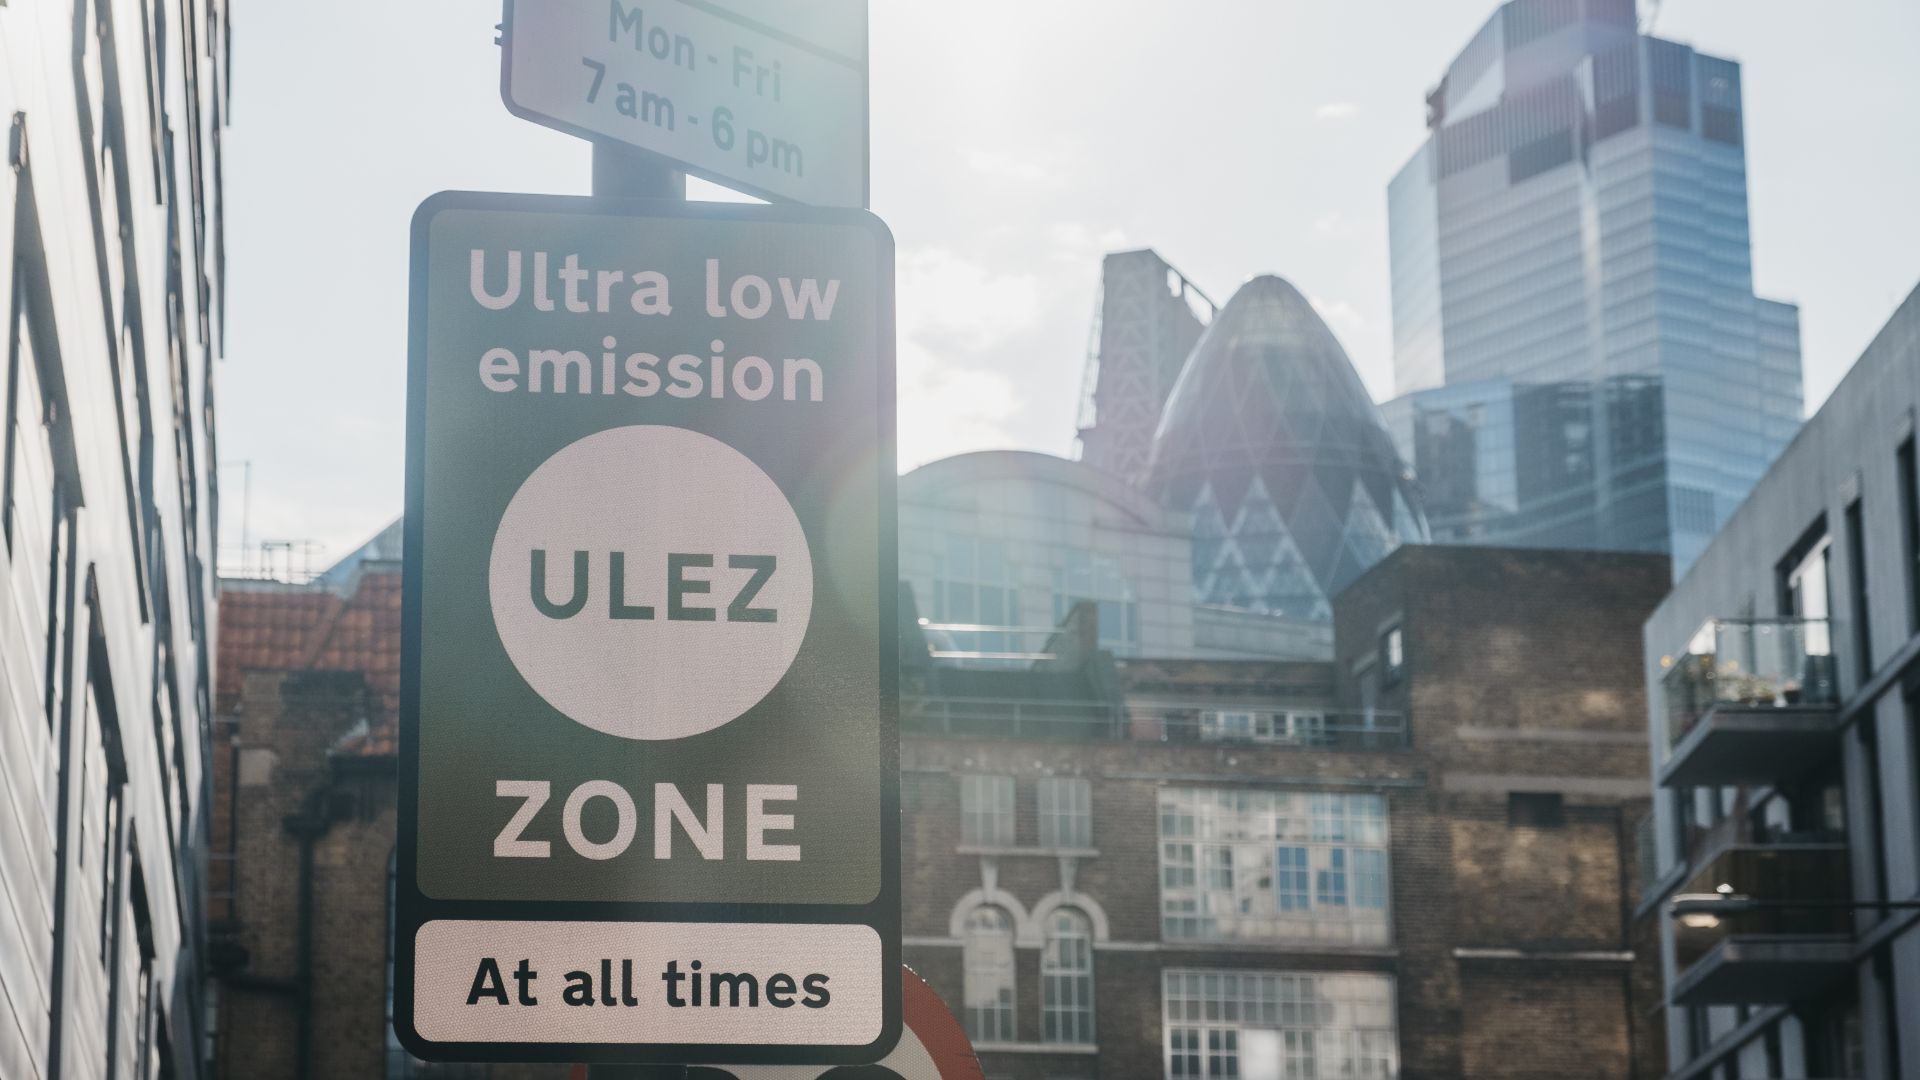 How to check if you need to pay the ulez